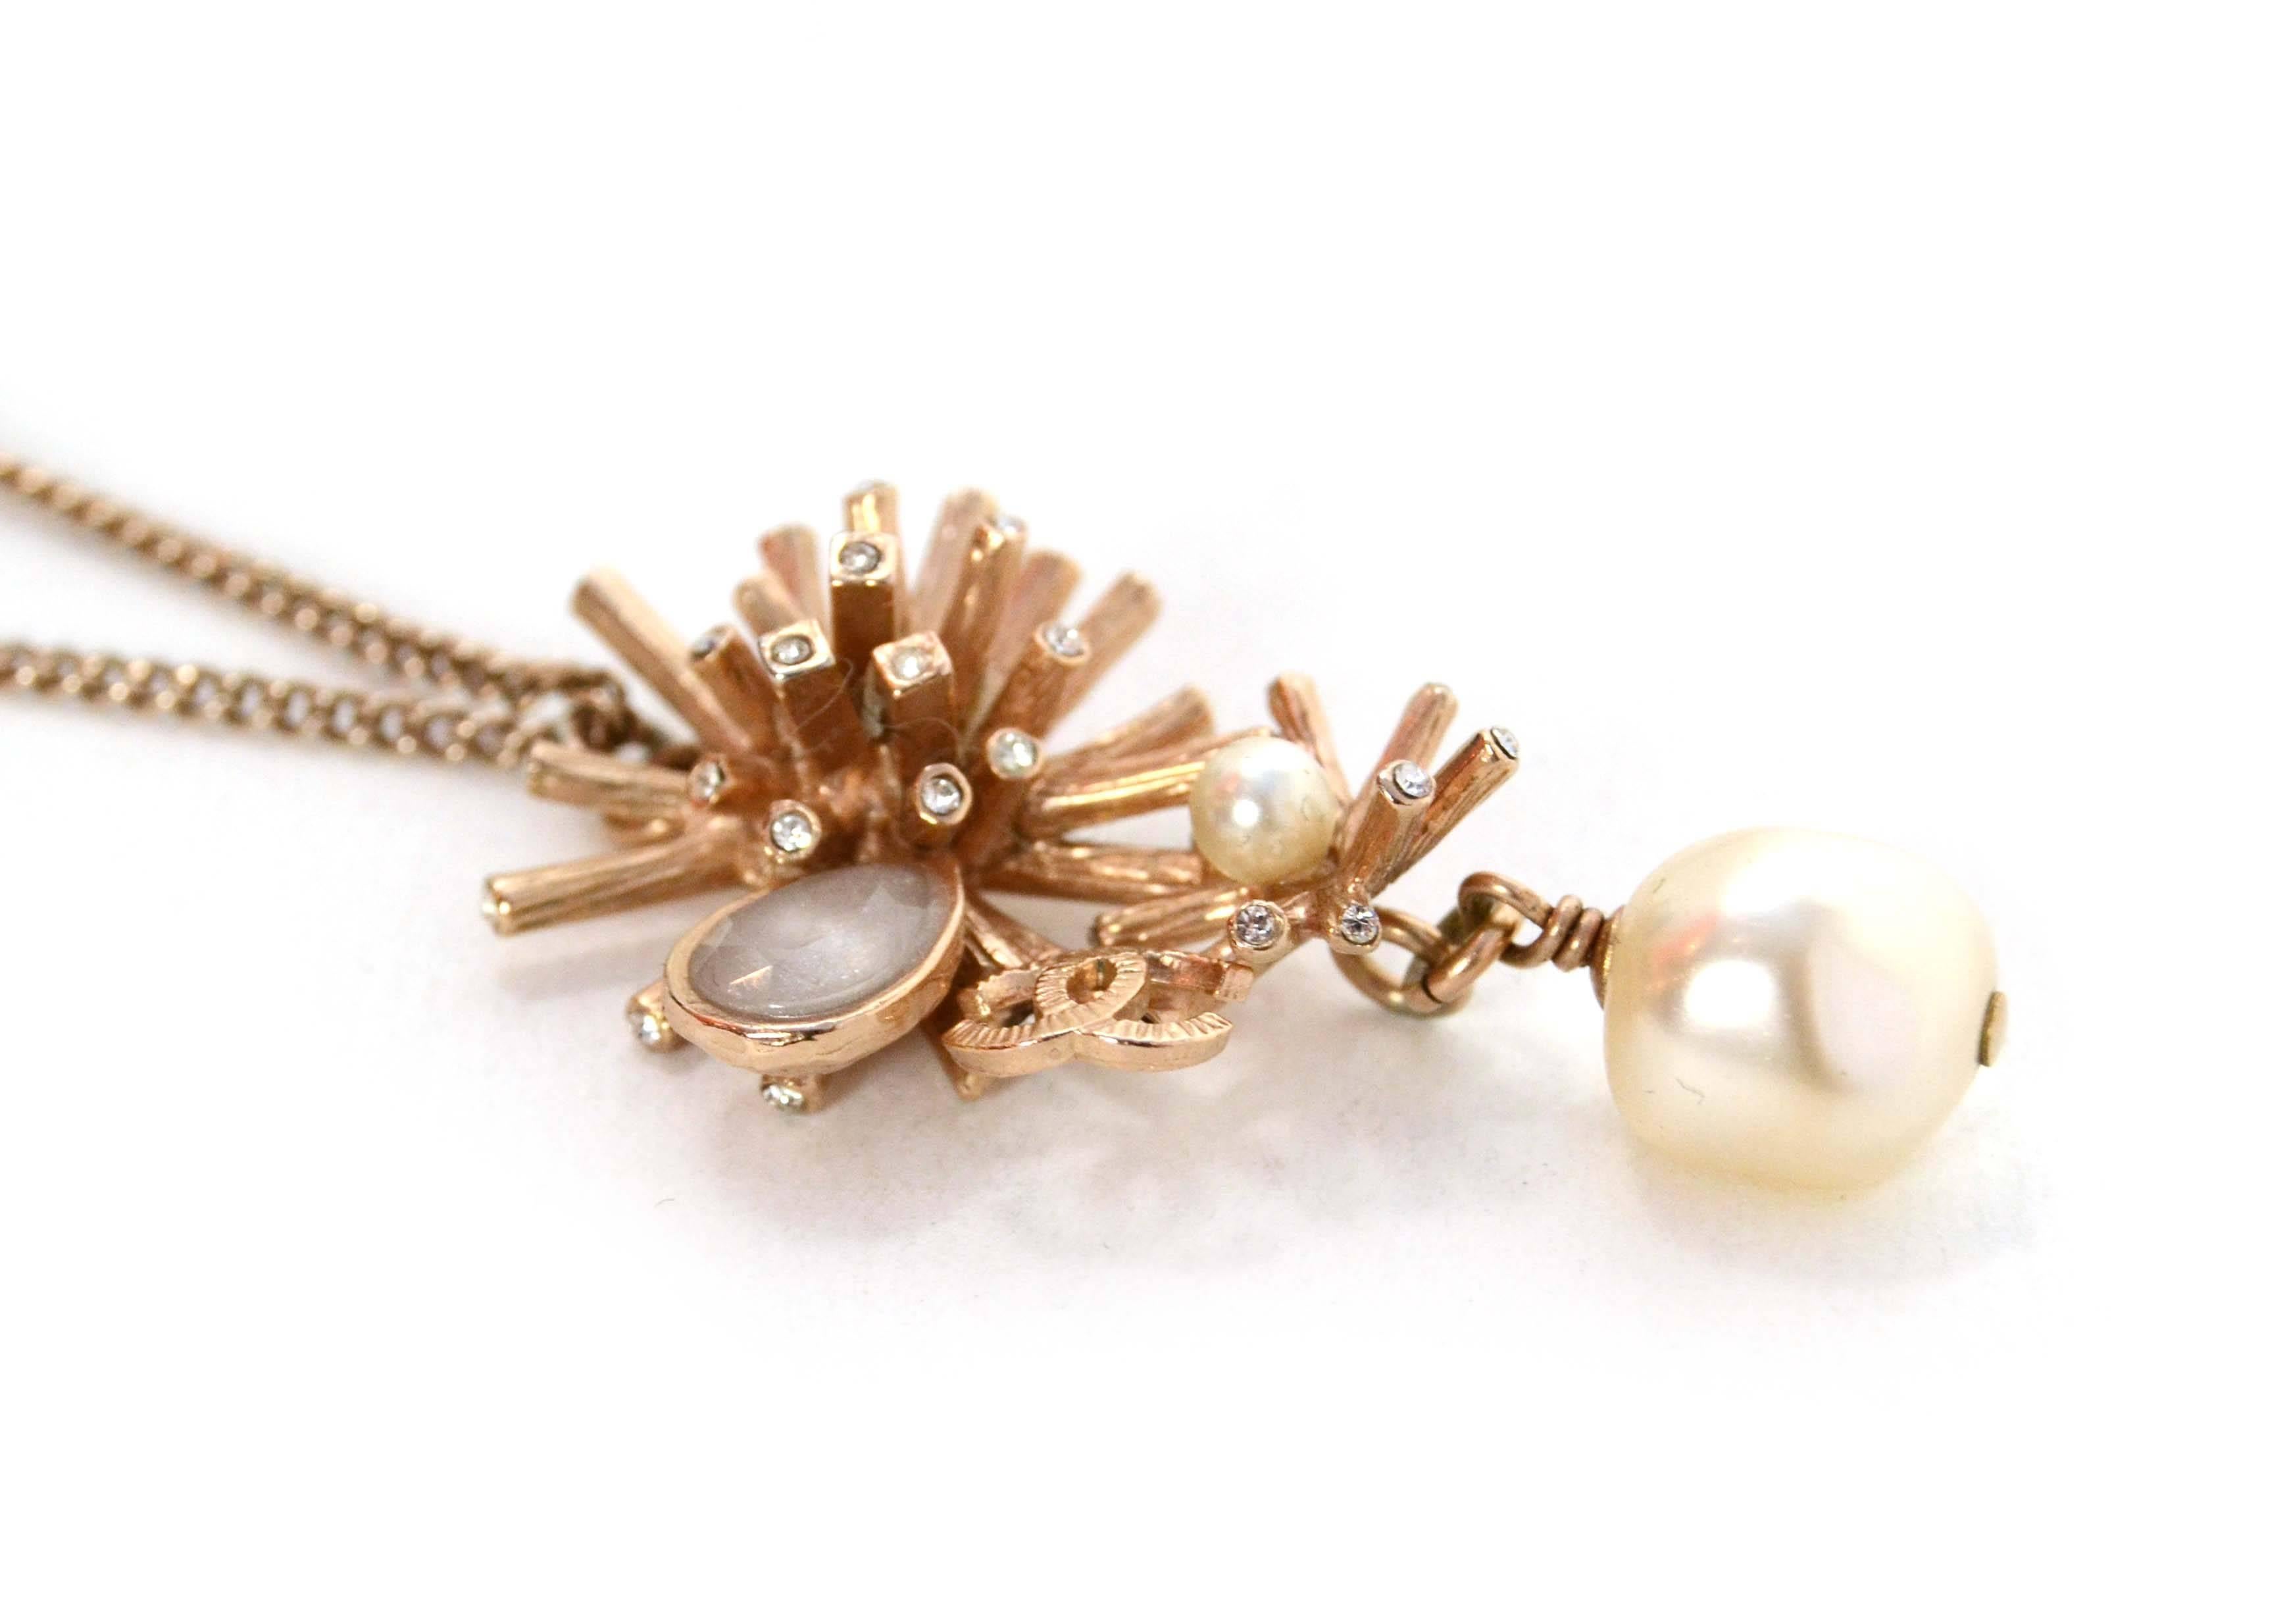 Chanel Gold Snowflake & Pearl Drop Necklace 
Features small tear rop stone and very small crystals at snowflake tips
Made In: Italy
Year of Production: 2012
Color: Goldtone and ivory
Materials: Metal, faux pearl, crystal and glass
Closure: